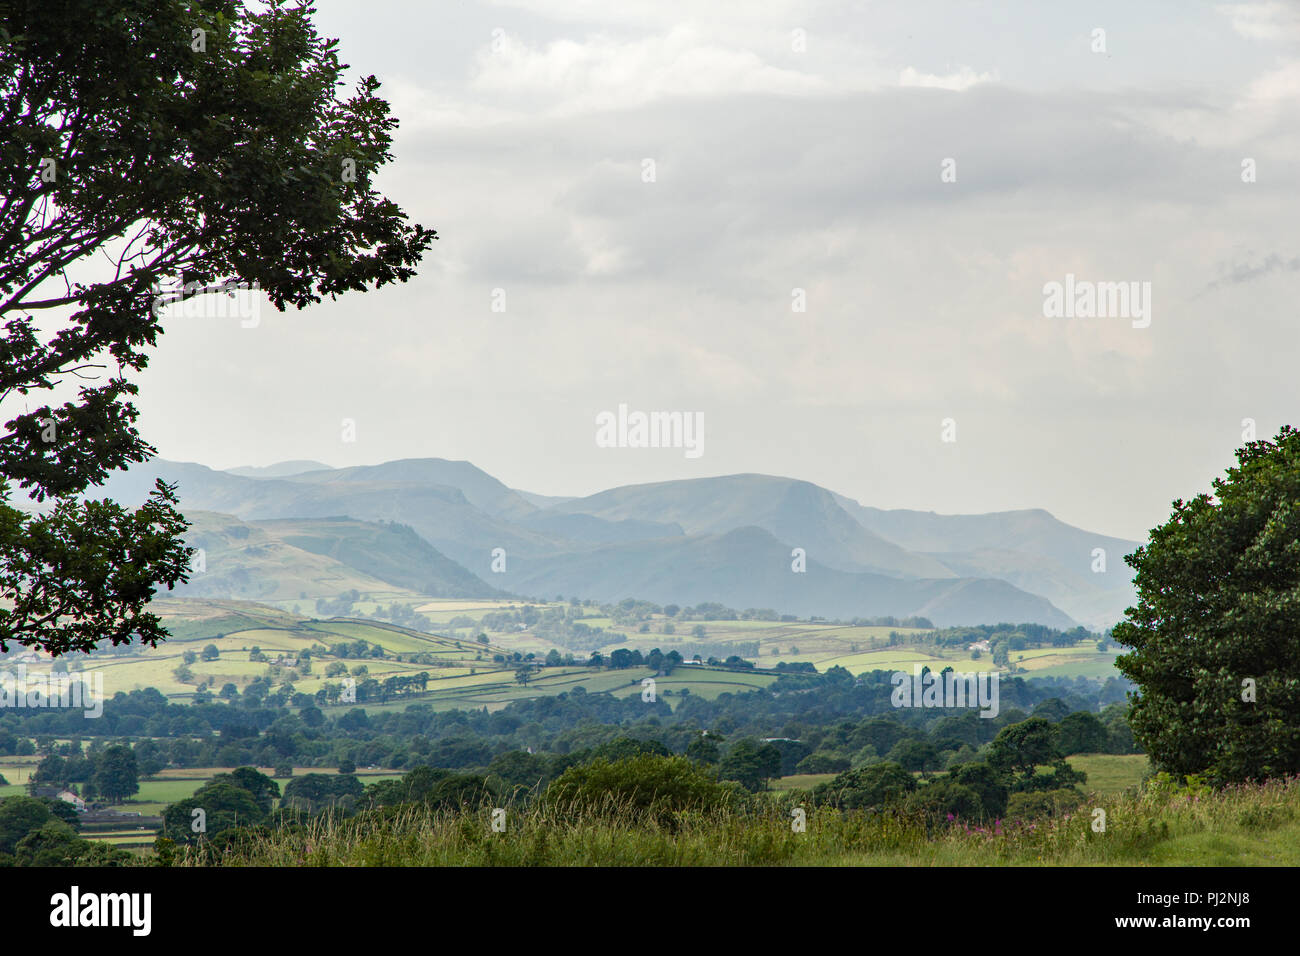 Lake District’s rolling hills and in the background are Robinson and Newlands Valley framed by trees on a hazy summer’s day Stock Photo